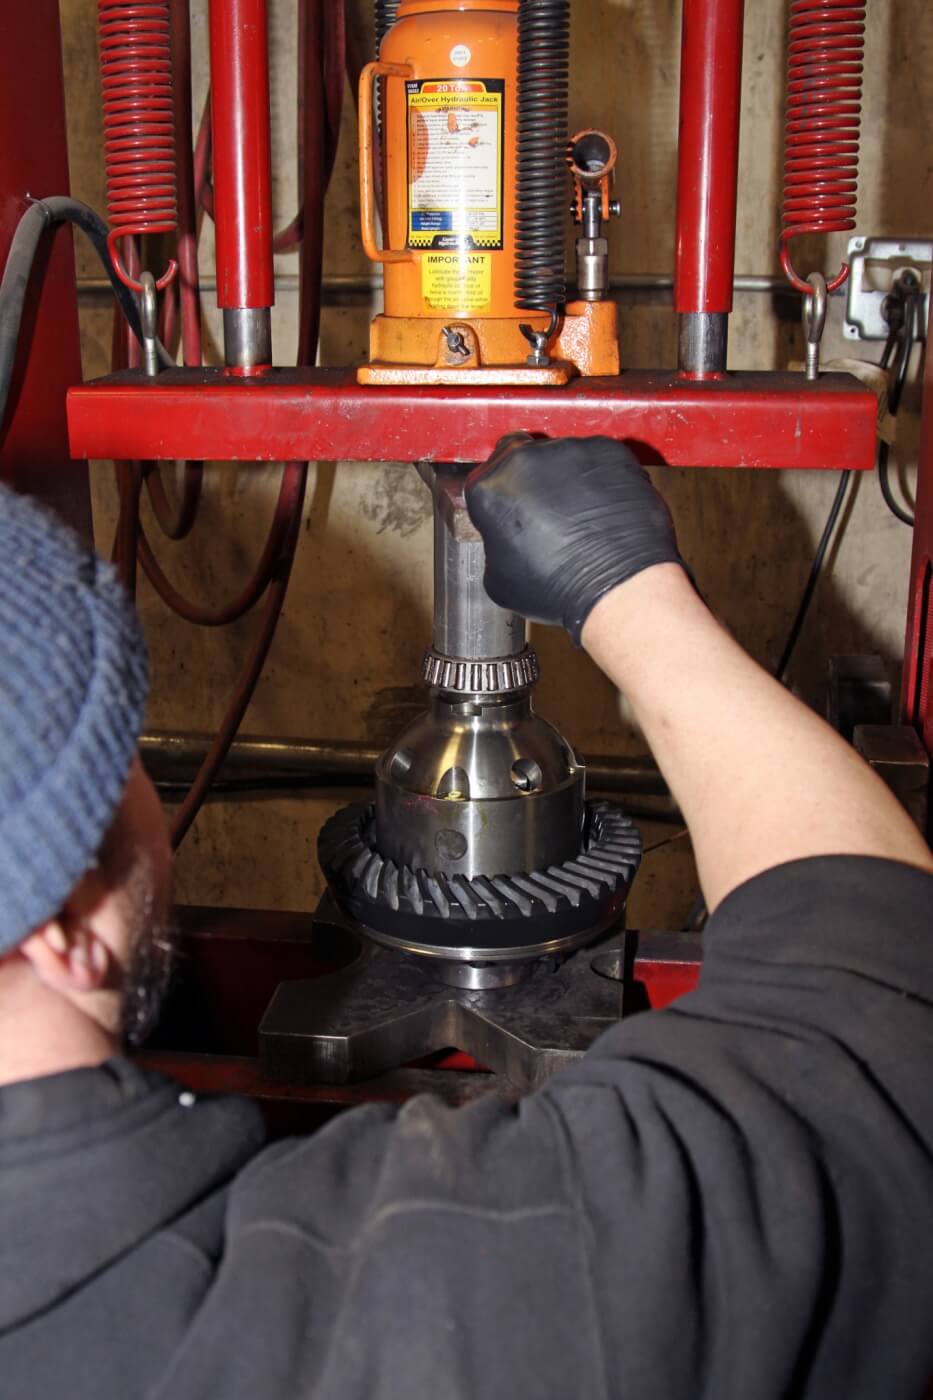 16. Nelson then uses a hydraulic press to install the new G2 bearings and the pinion gear on the locker. Important: If you do not have a press, DO NOT try to hammer on the bearings! Take the parts to a shop with a press and have them do it for you.